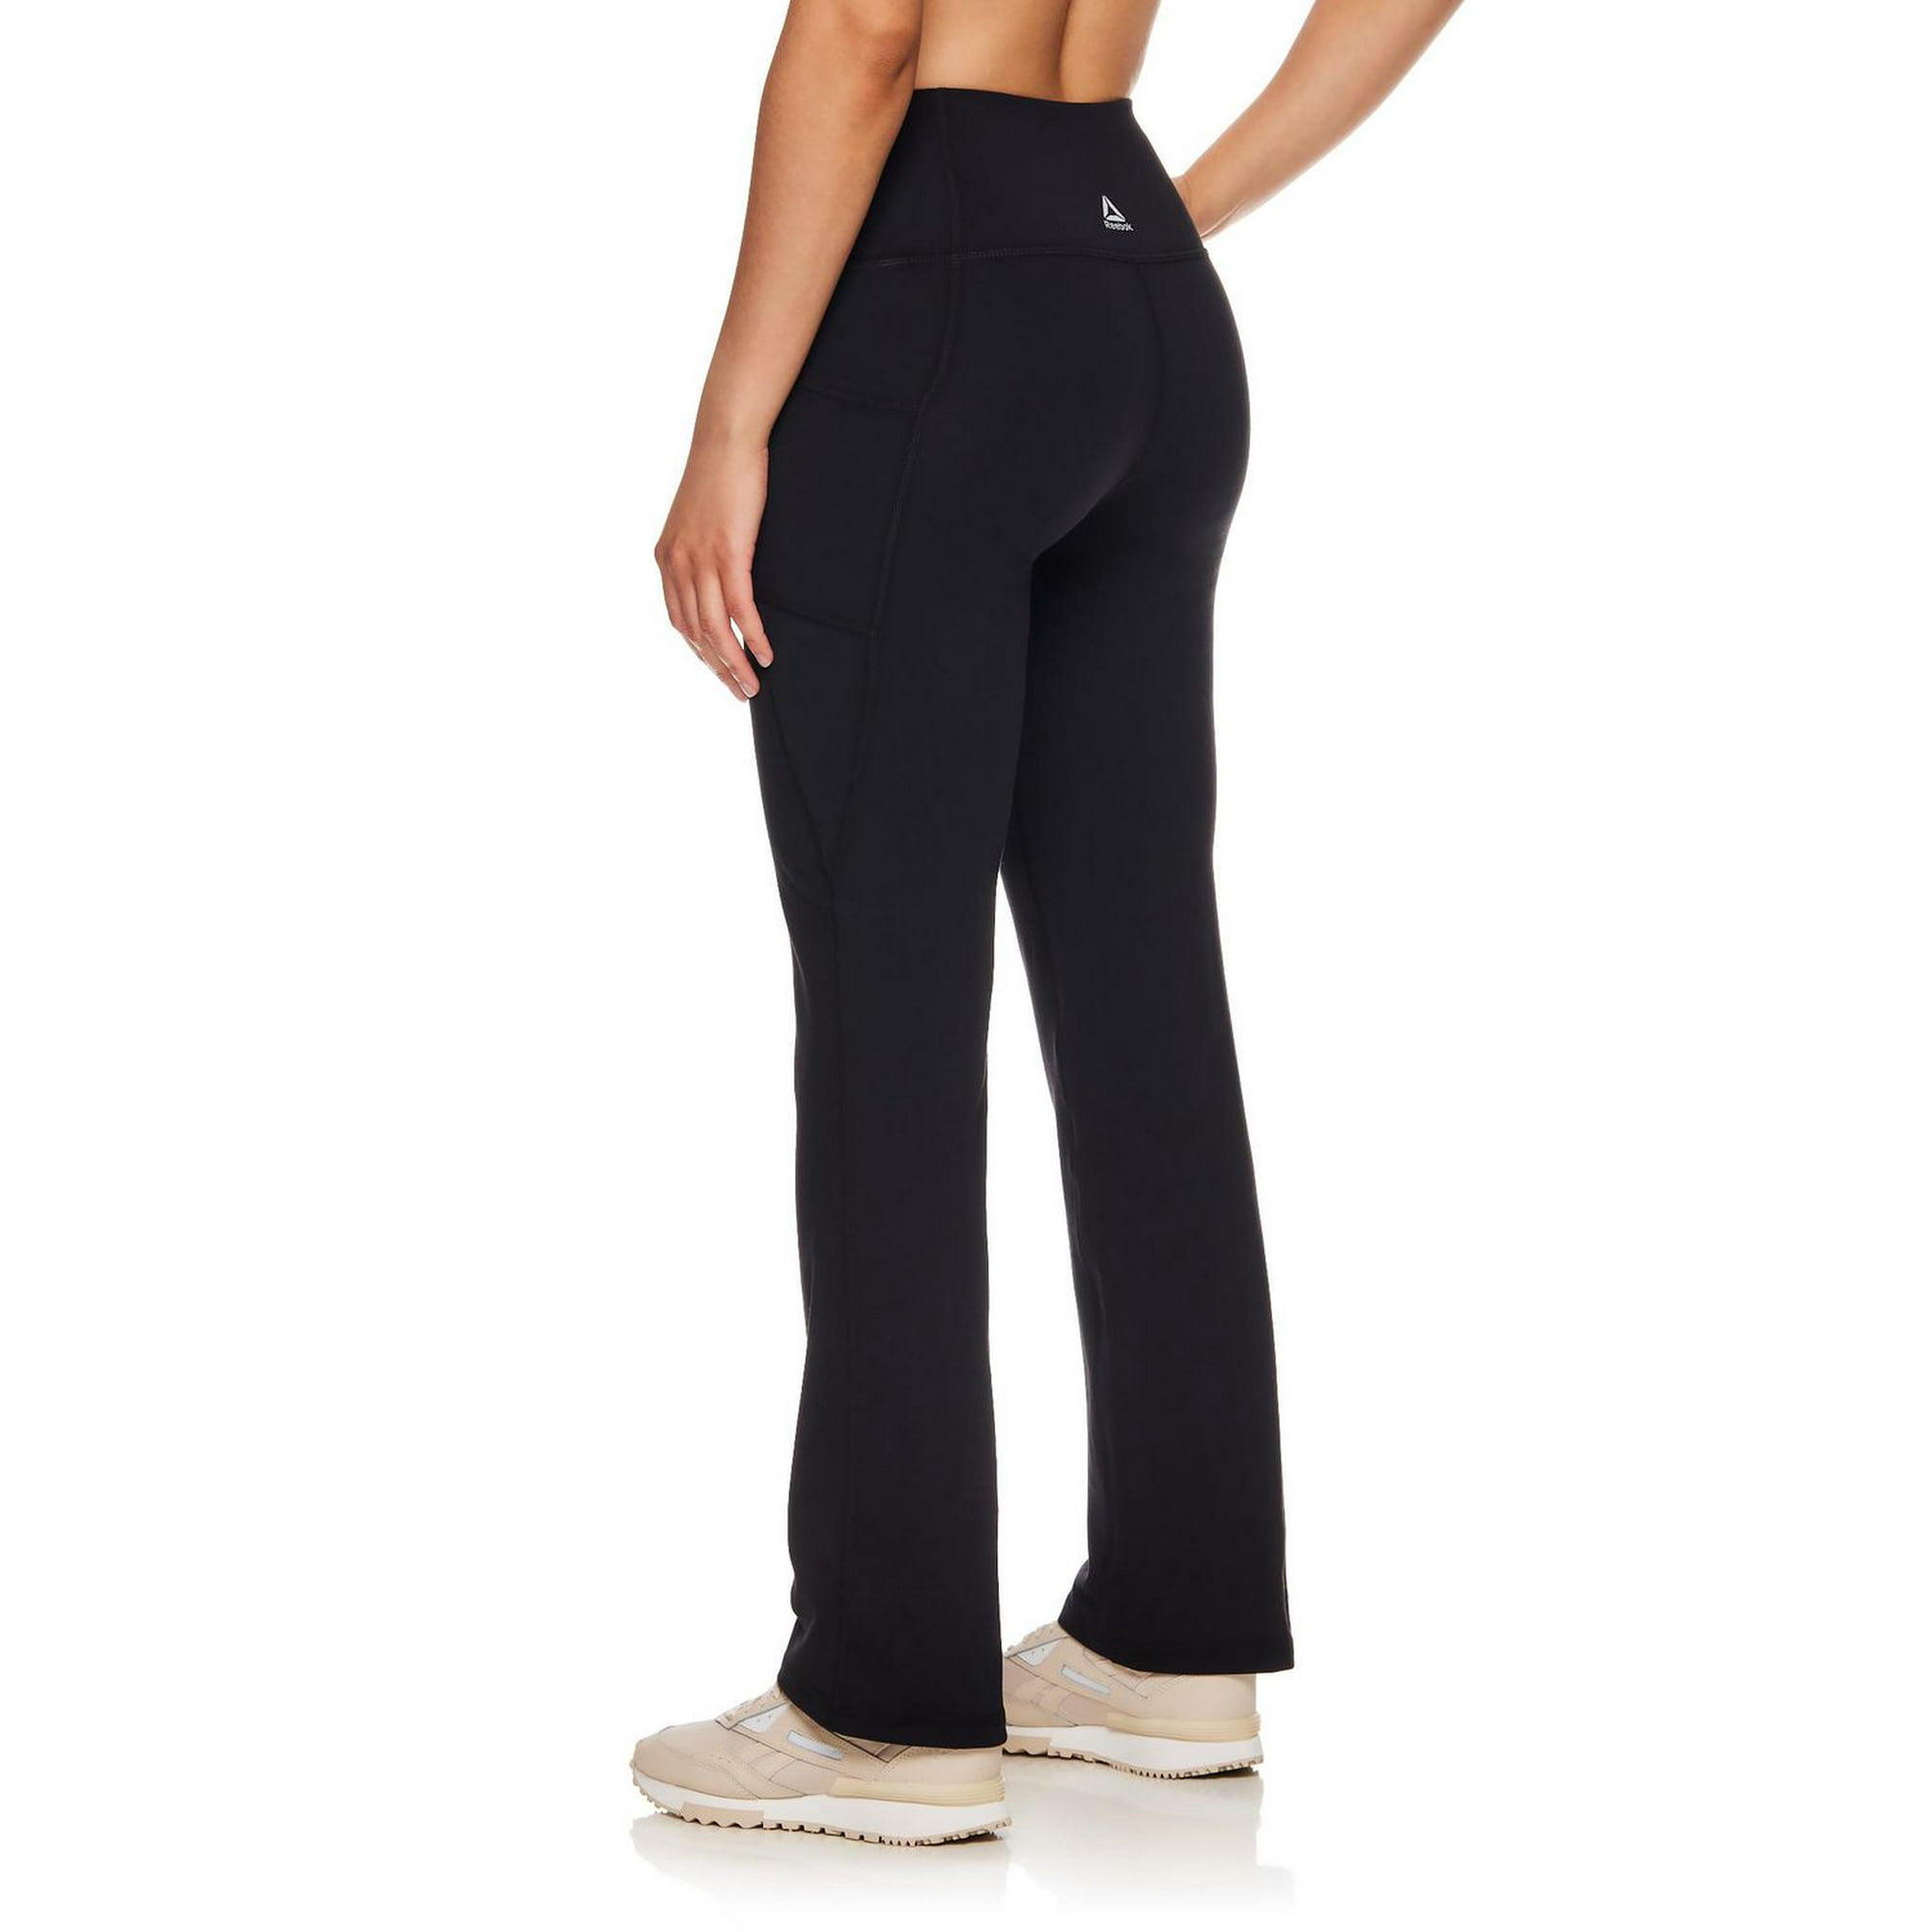 Up To 80% Off on Women's Casual Boot Cut Yoga